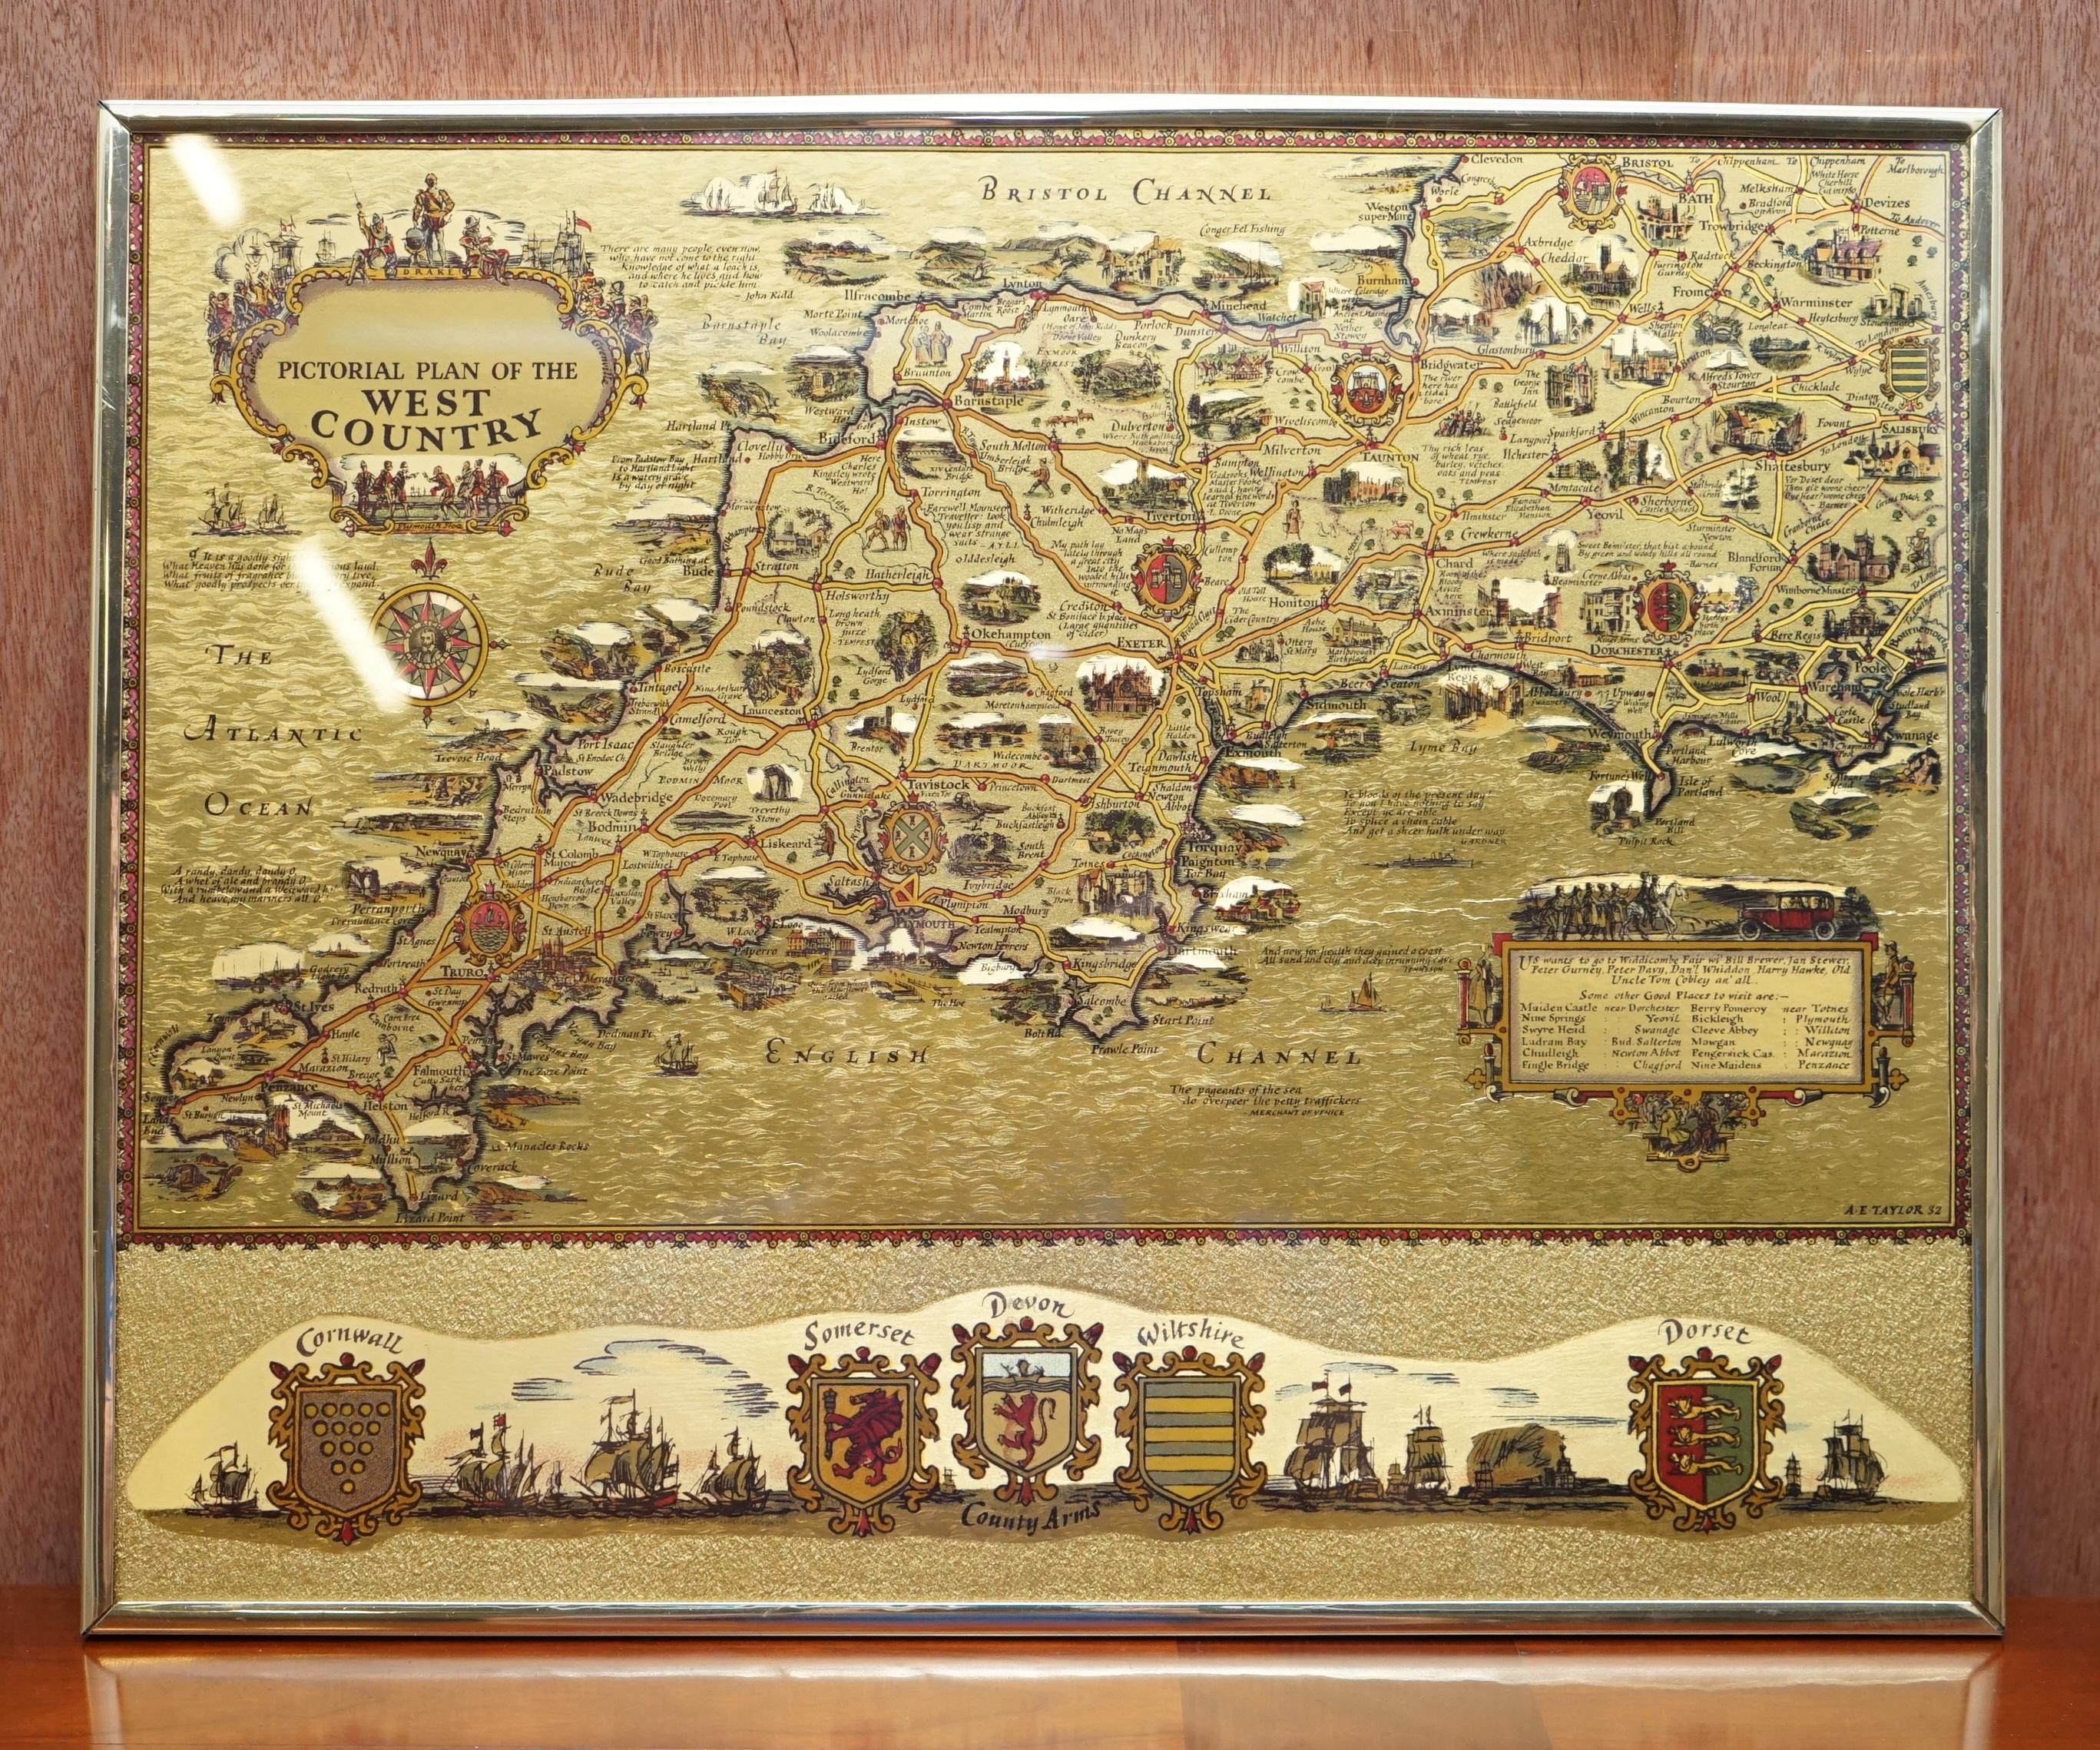 We are delighted to offer for sale this lovely Antique style pictorial plan map of the West Country of England etched in gold leaf foil

This is a very interesting and decorative piece, it looks good in any setting. It is an etching some was made